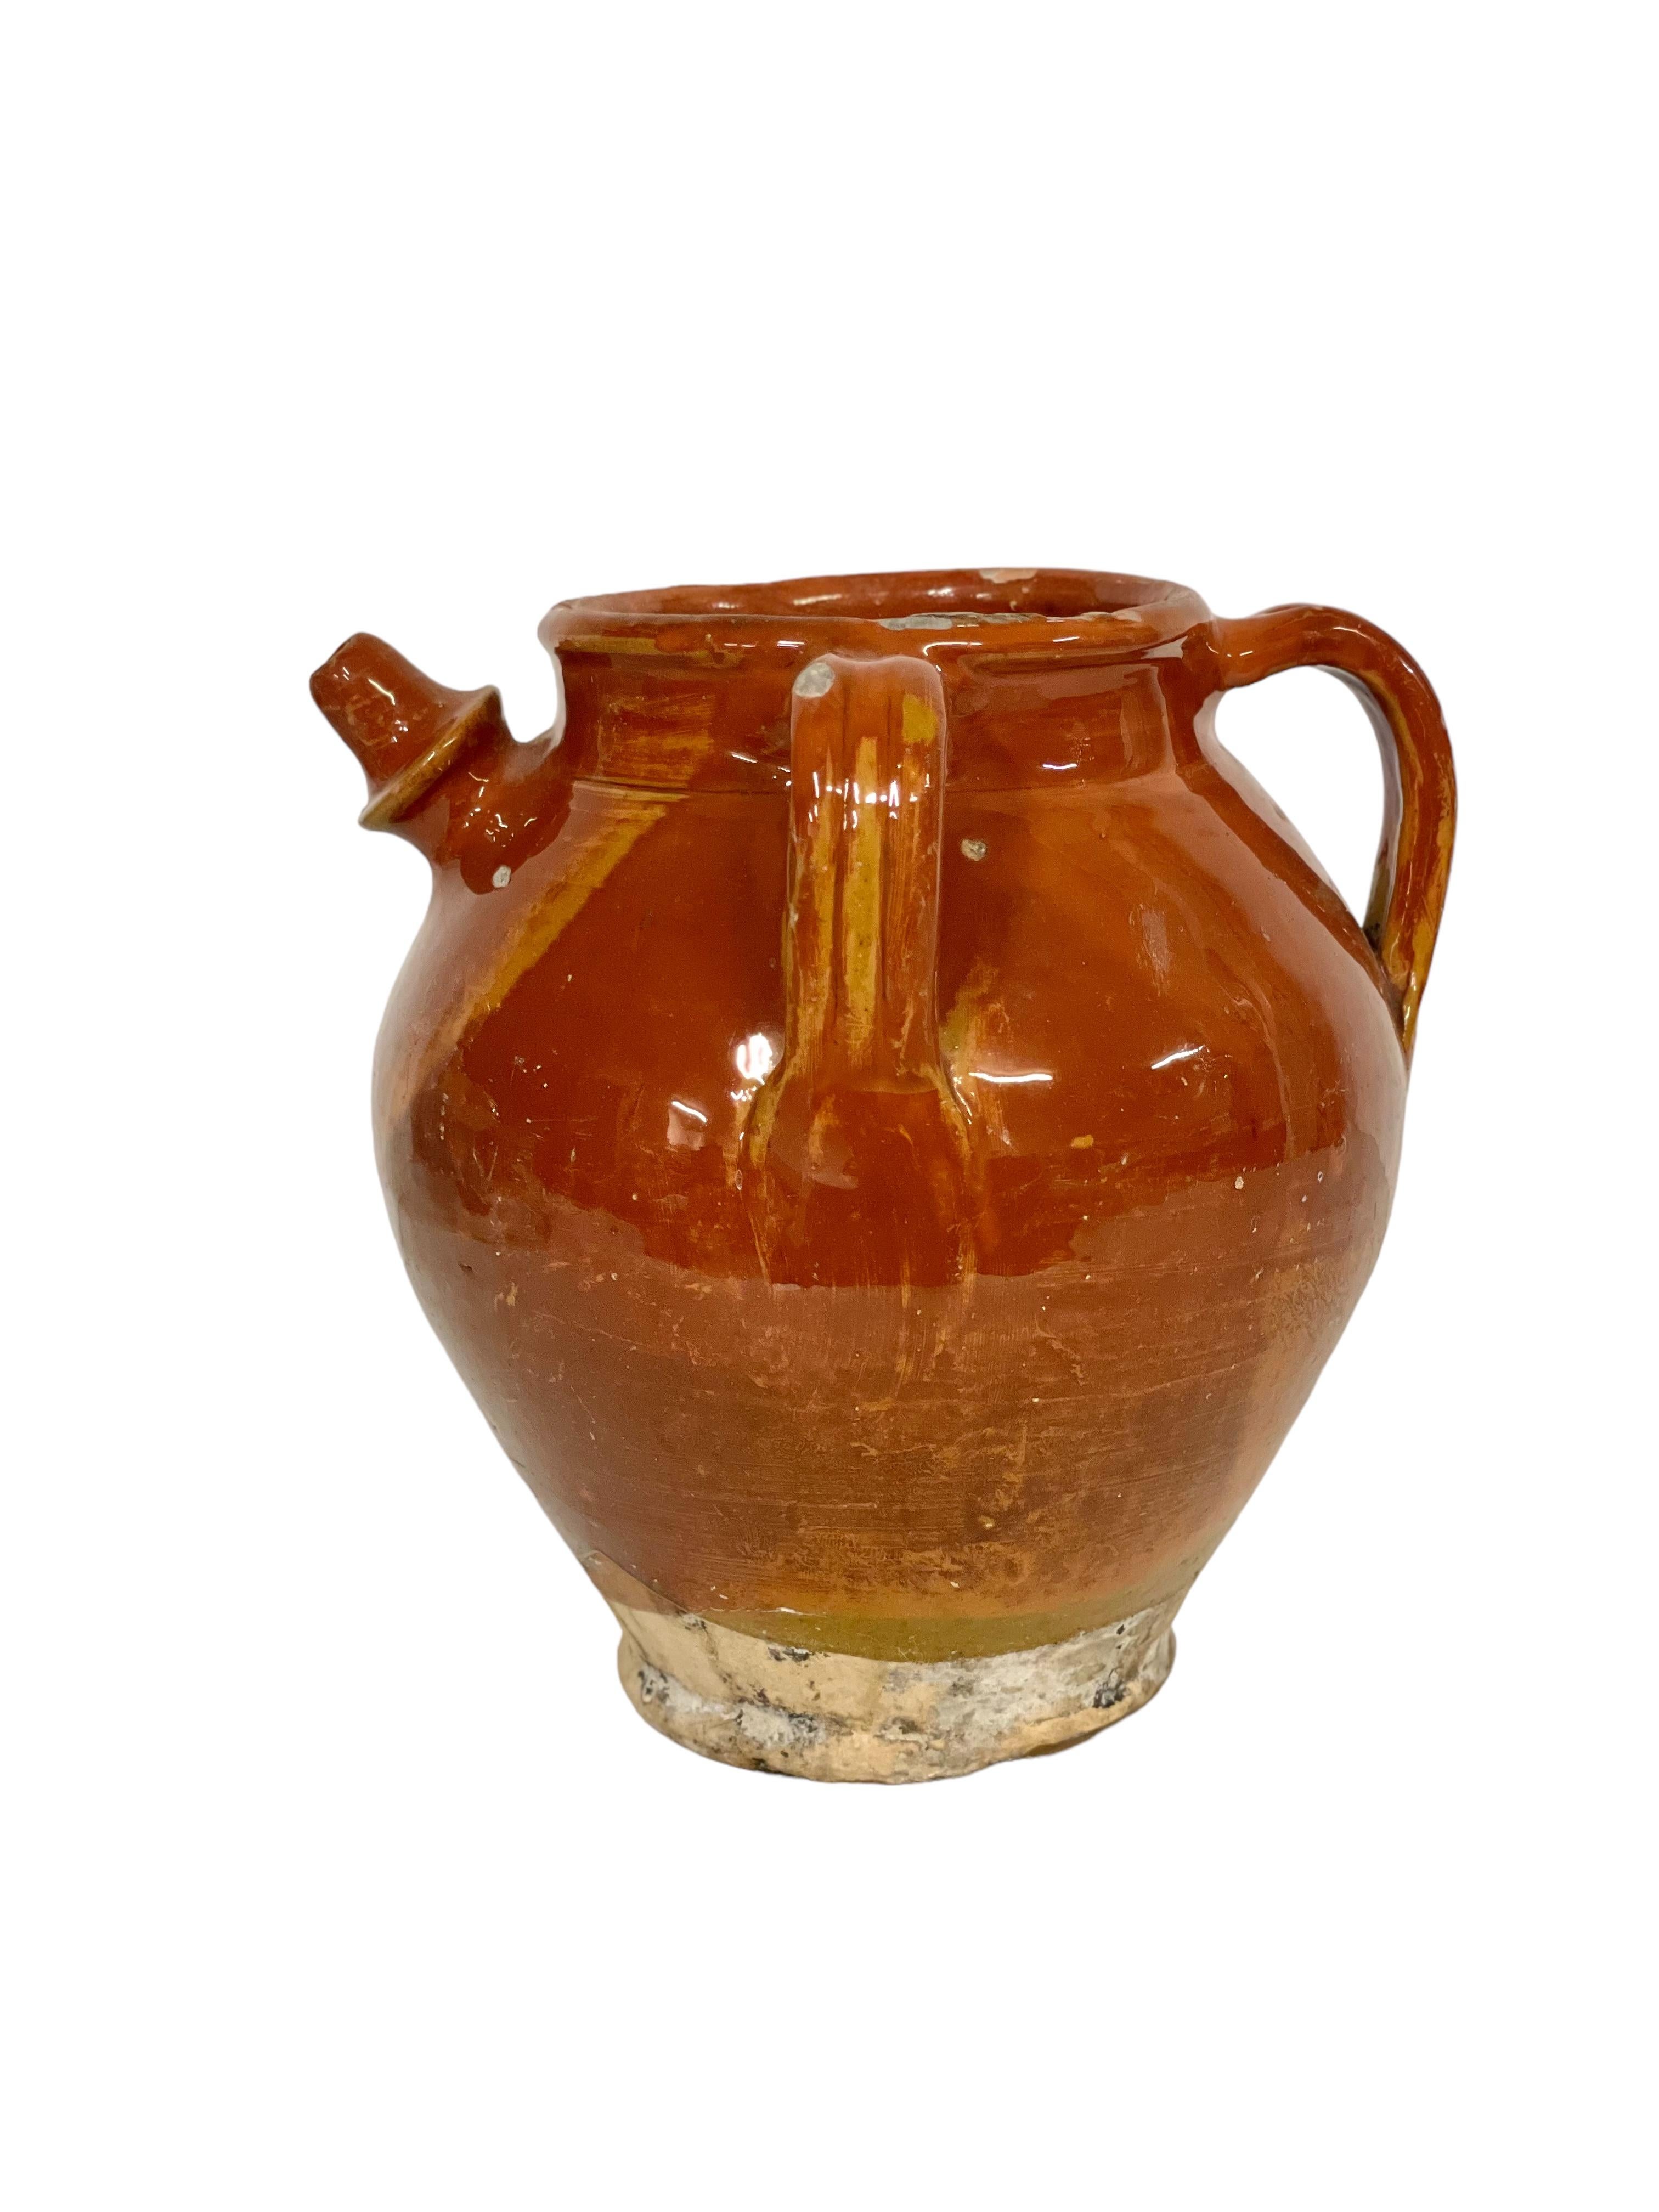 A very pretty petite glazed jug originating from the Dordogne region of south-west France and dating from the 19th century. Originally conceived for the storage and preservation of nut oils in a country kitchen, it may also have been used to store